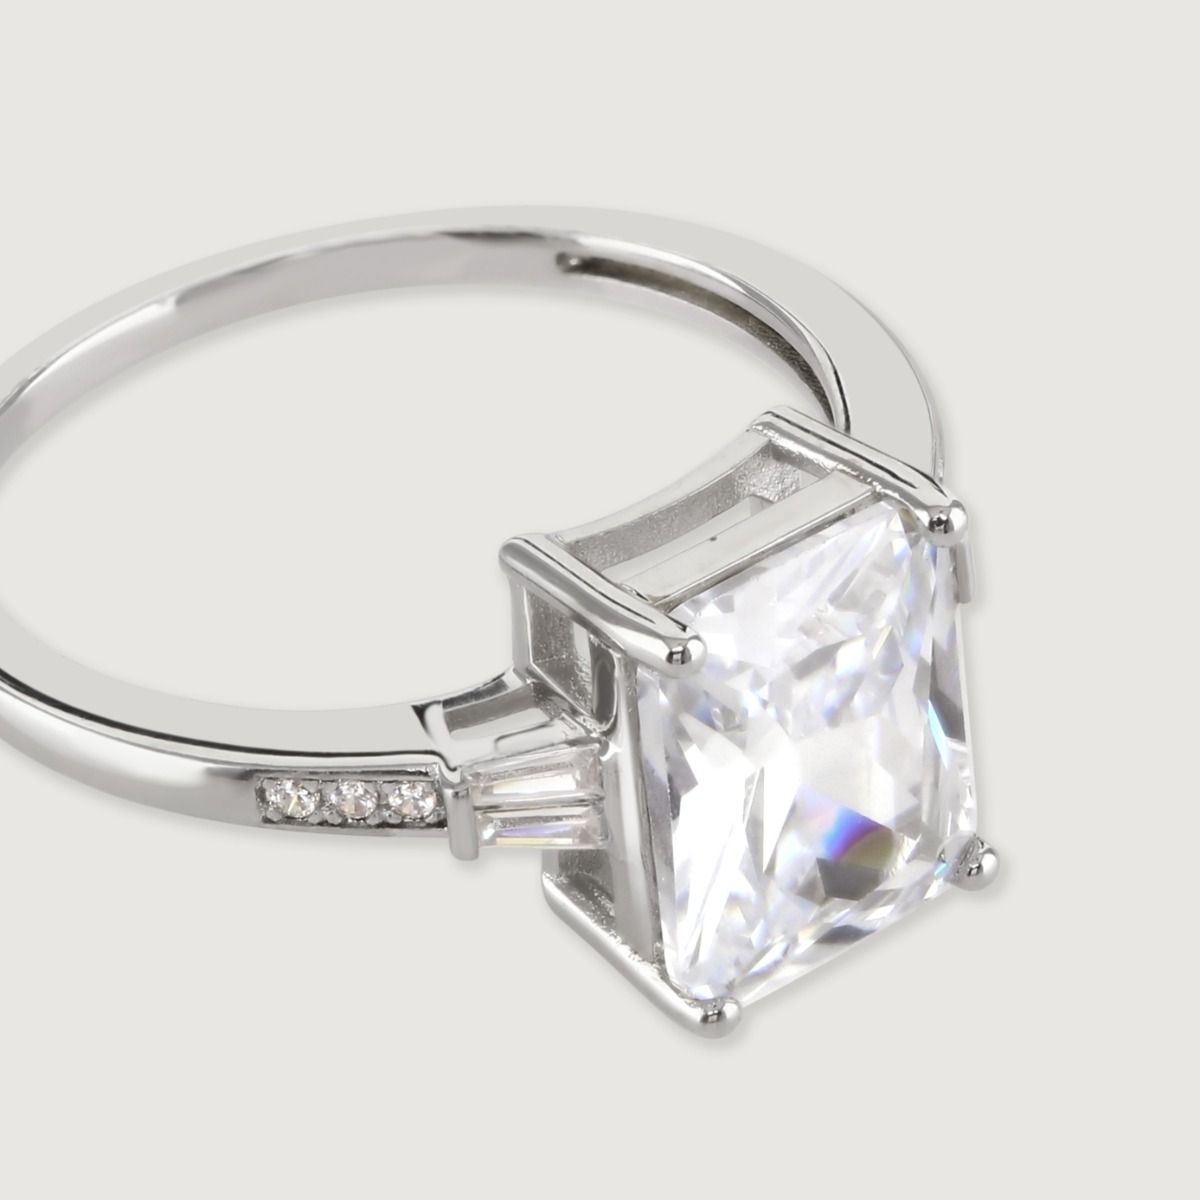 A stunning art deco inspired ring featuring an immaculate baguette cut central cubic zirconia stone, with tapered cubic zirconia baguette sides flawlessly faceted for maximum sparkle.